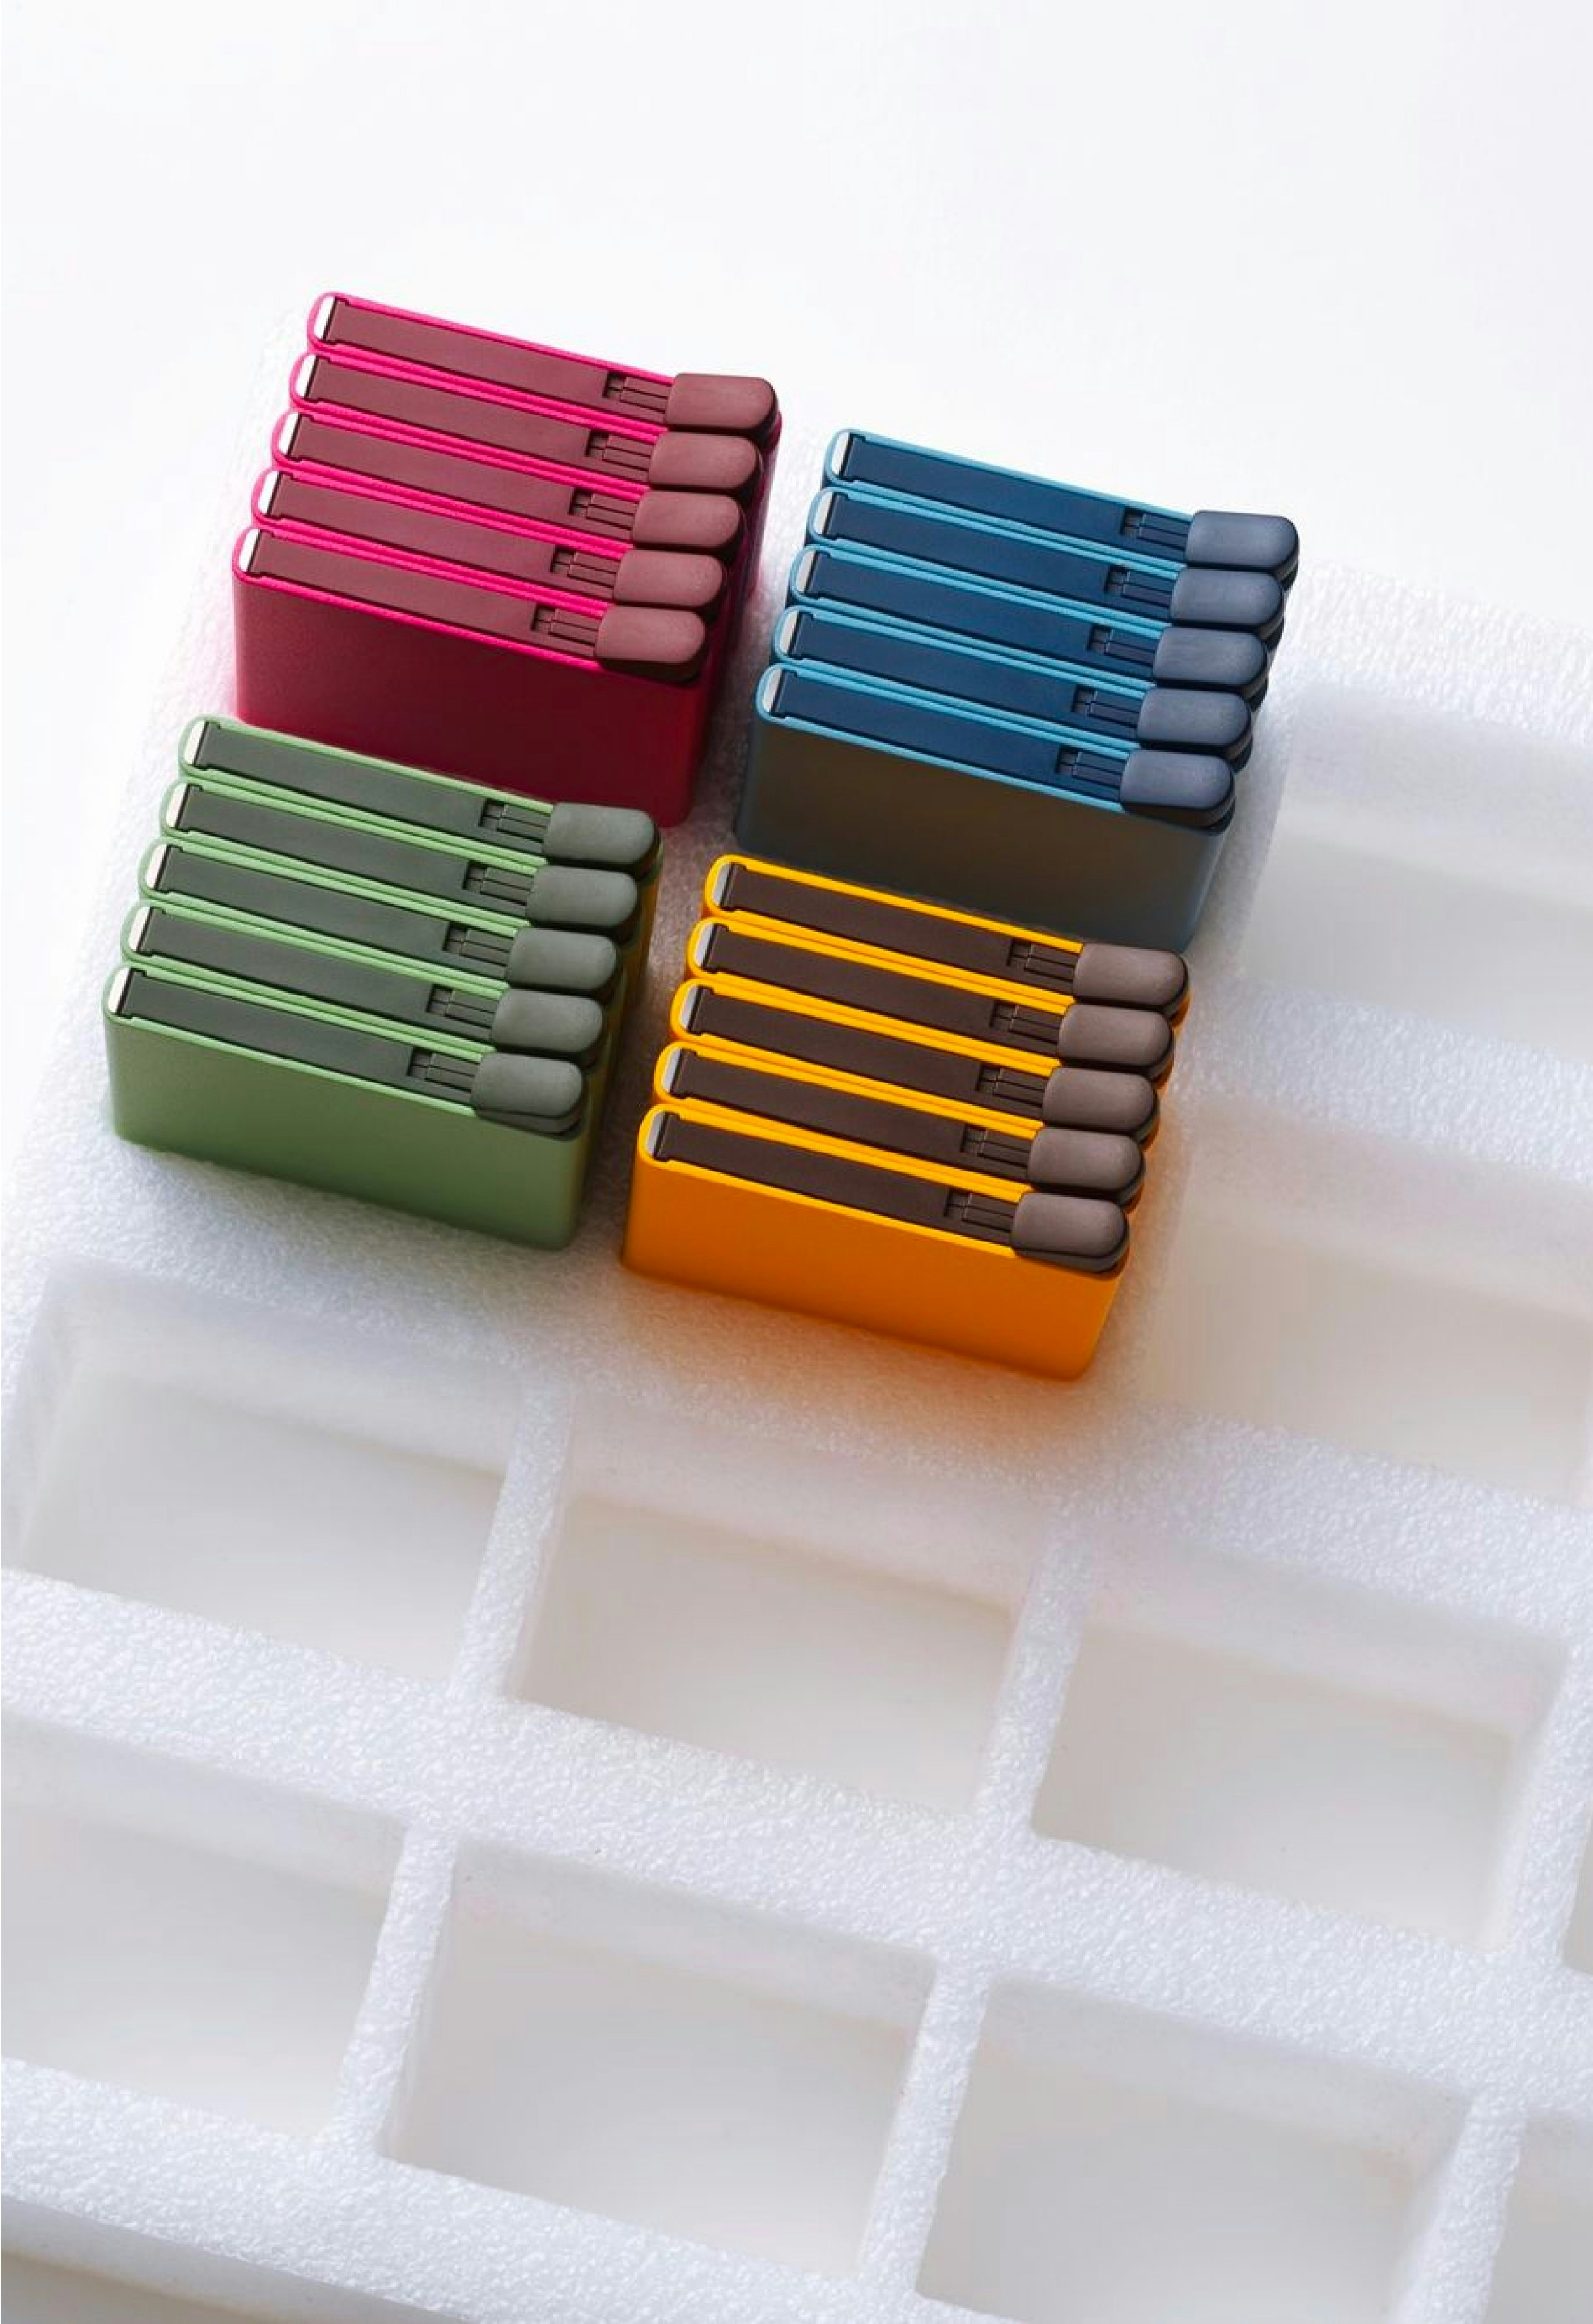 Color variation of cardprotectors